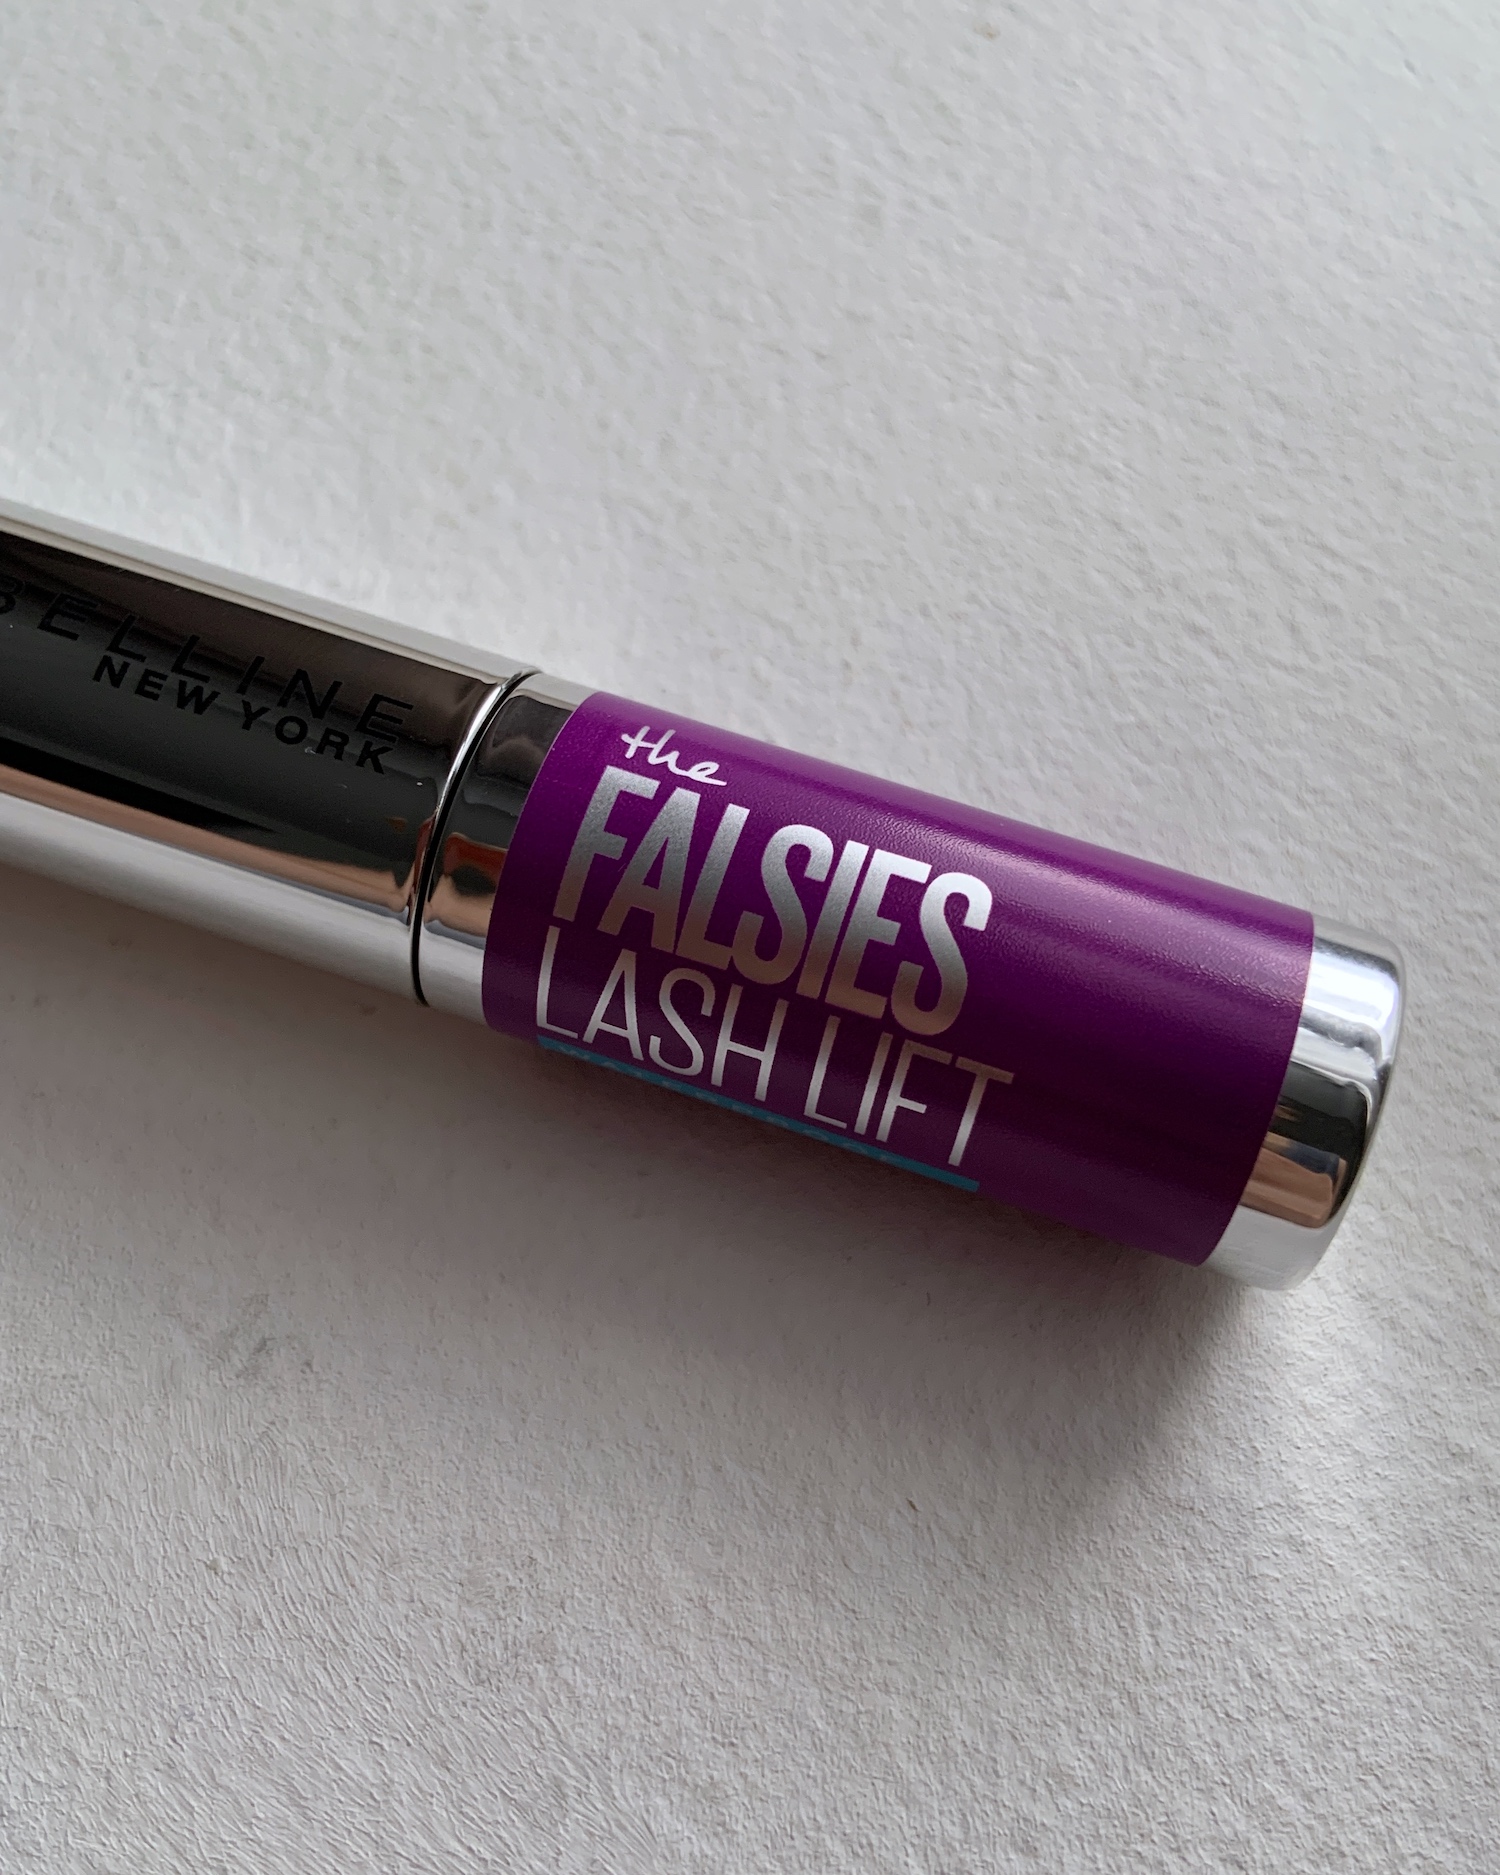 After) Falsies Lift Review: & (Before Maybelline The Mascara Lash